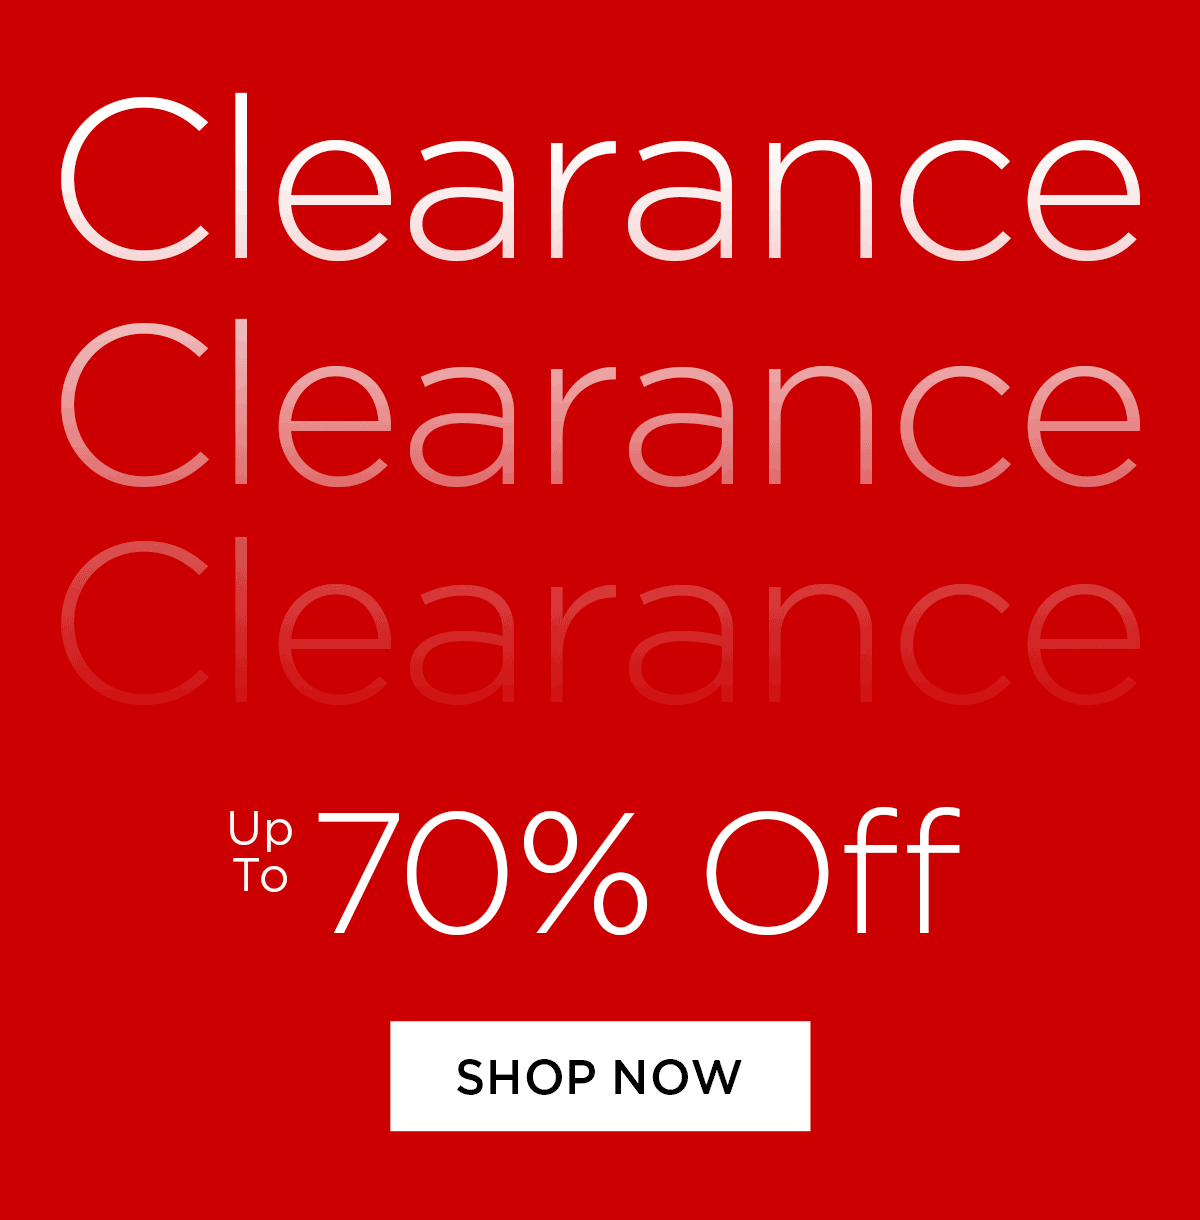 Clearance Up to 70% Off - Shop Now